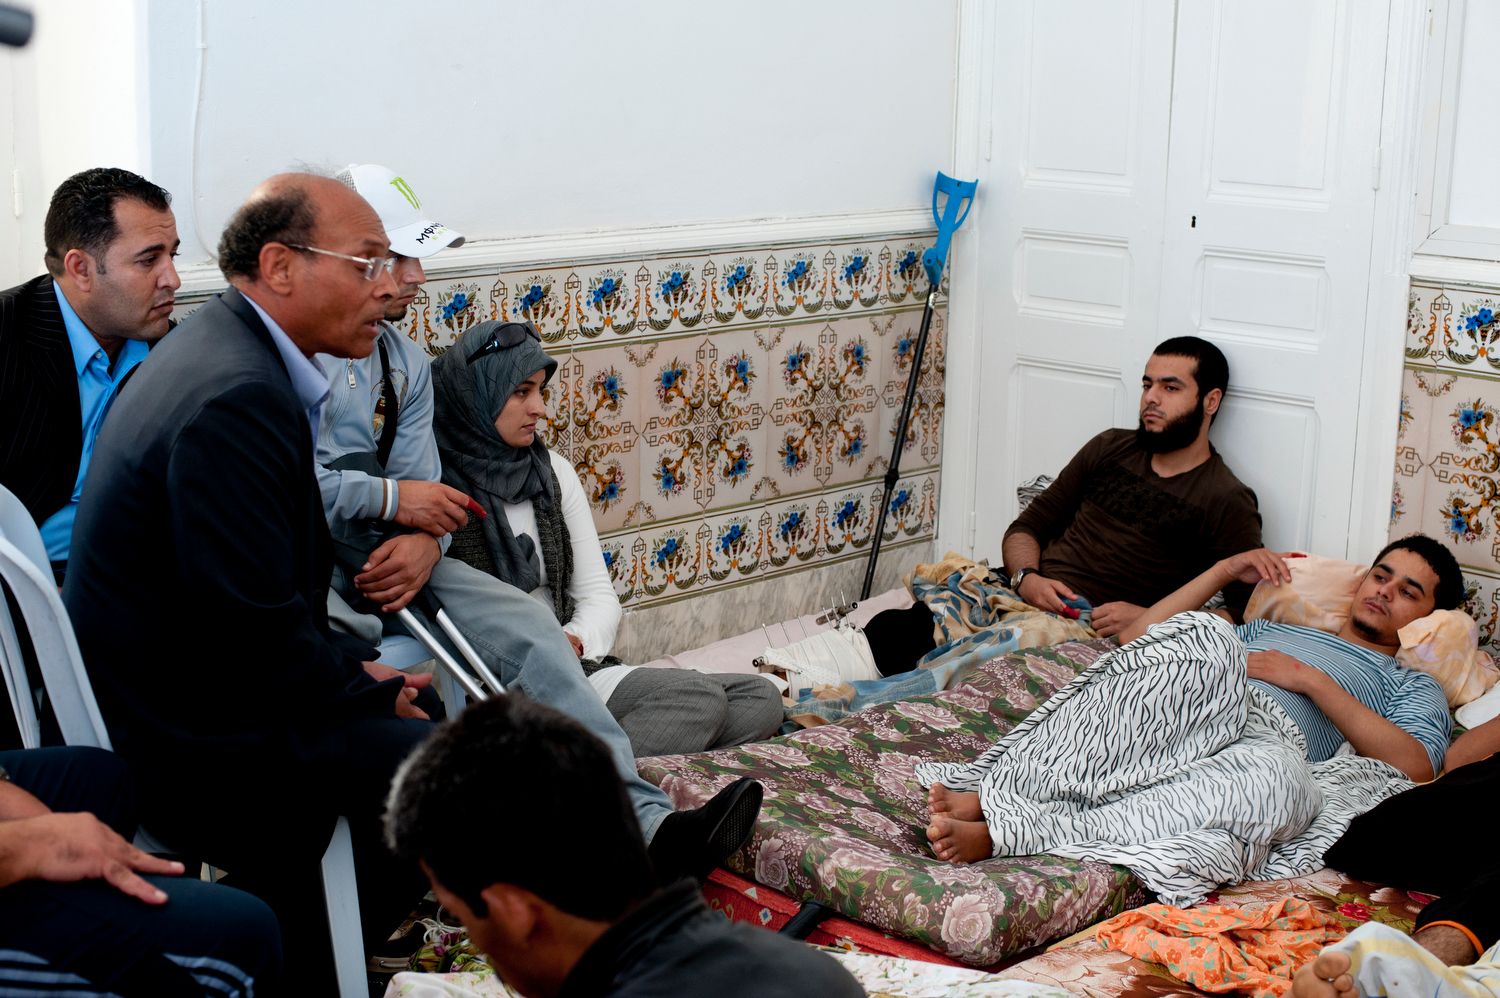  Moncef Marzouki (L) in discussion with the wounded.

Wounded during the revolution, this group of young men and women started a hunger strike to incite the interim government to uphold their agreement to pay their medical expenses 
 